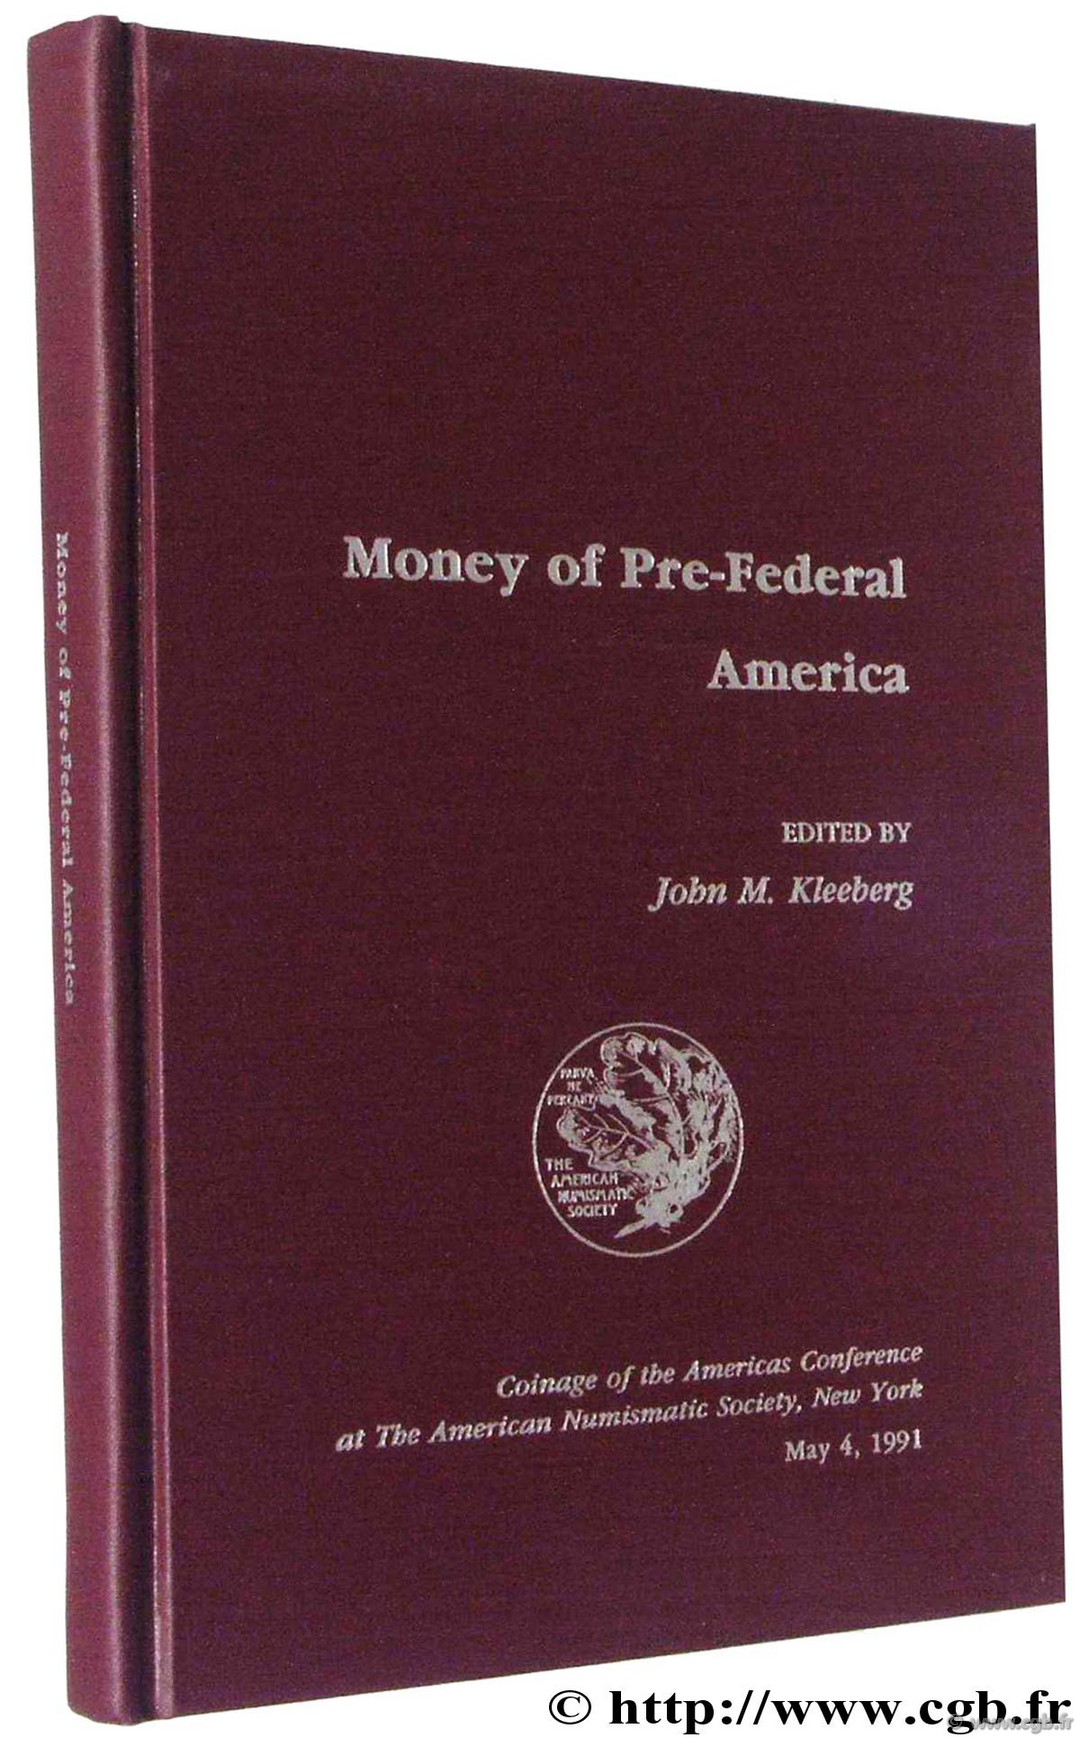 Money of Pre-Federal America, Coinage of the Americas Conférence at the American Numismatic Society, New York May 4, 1991 